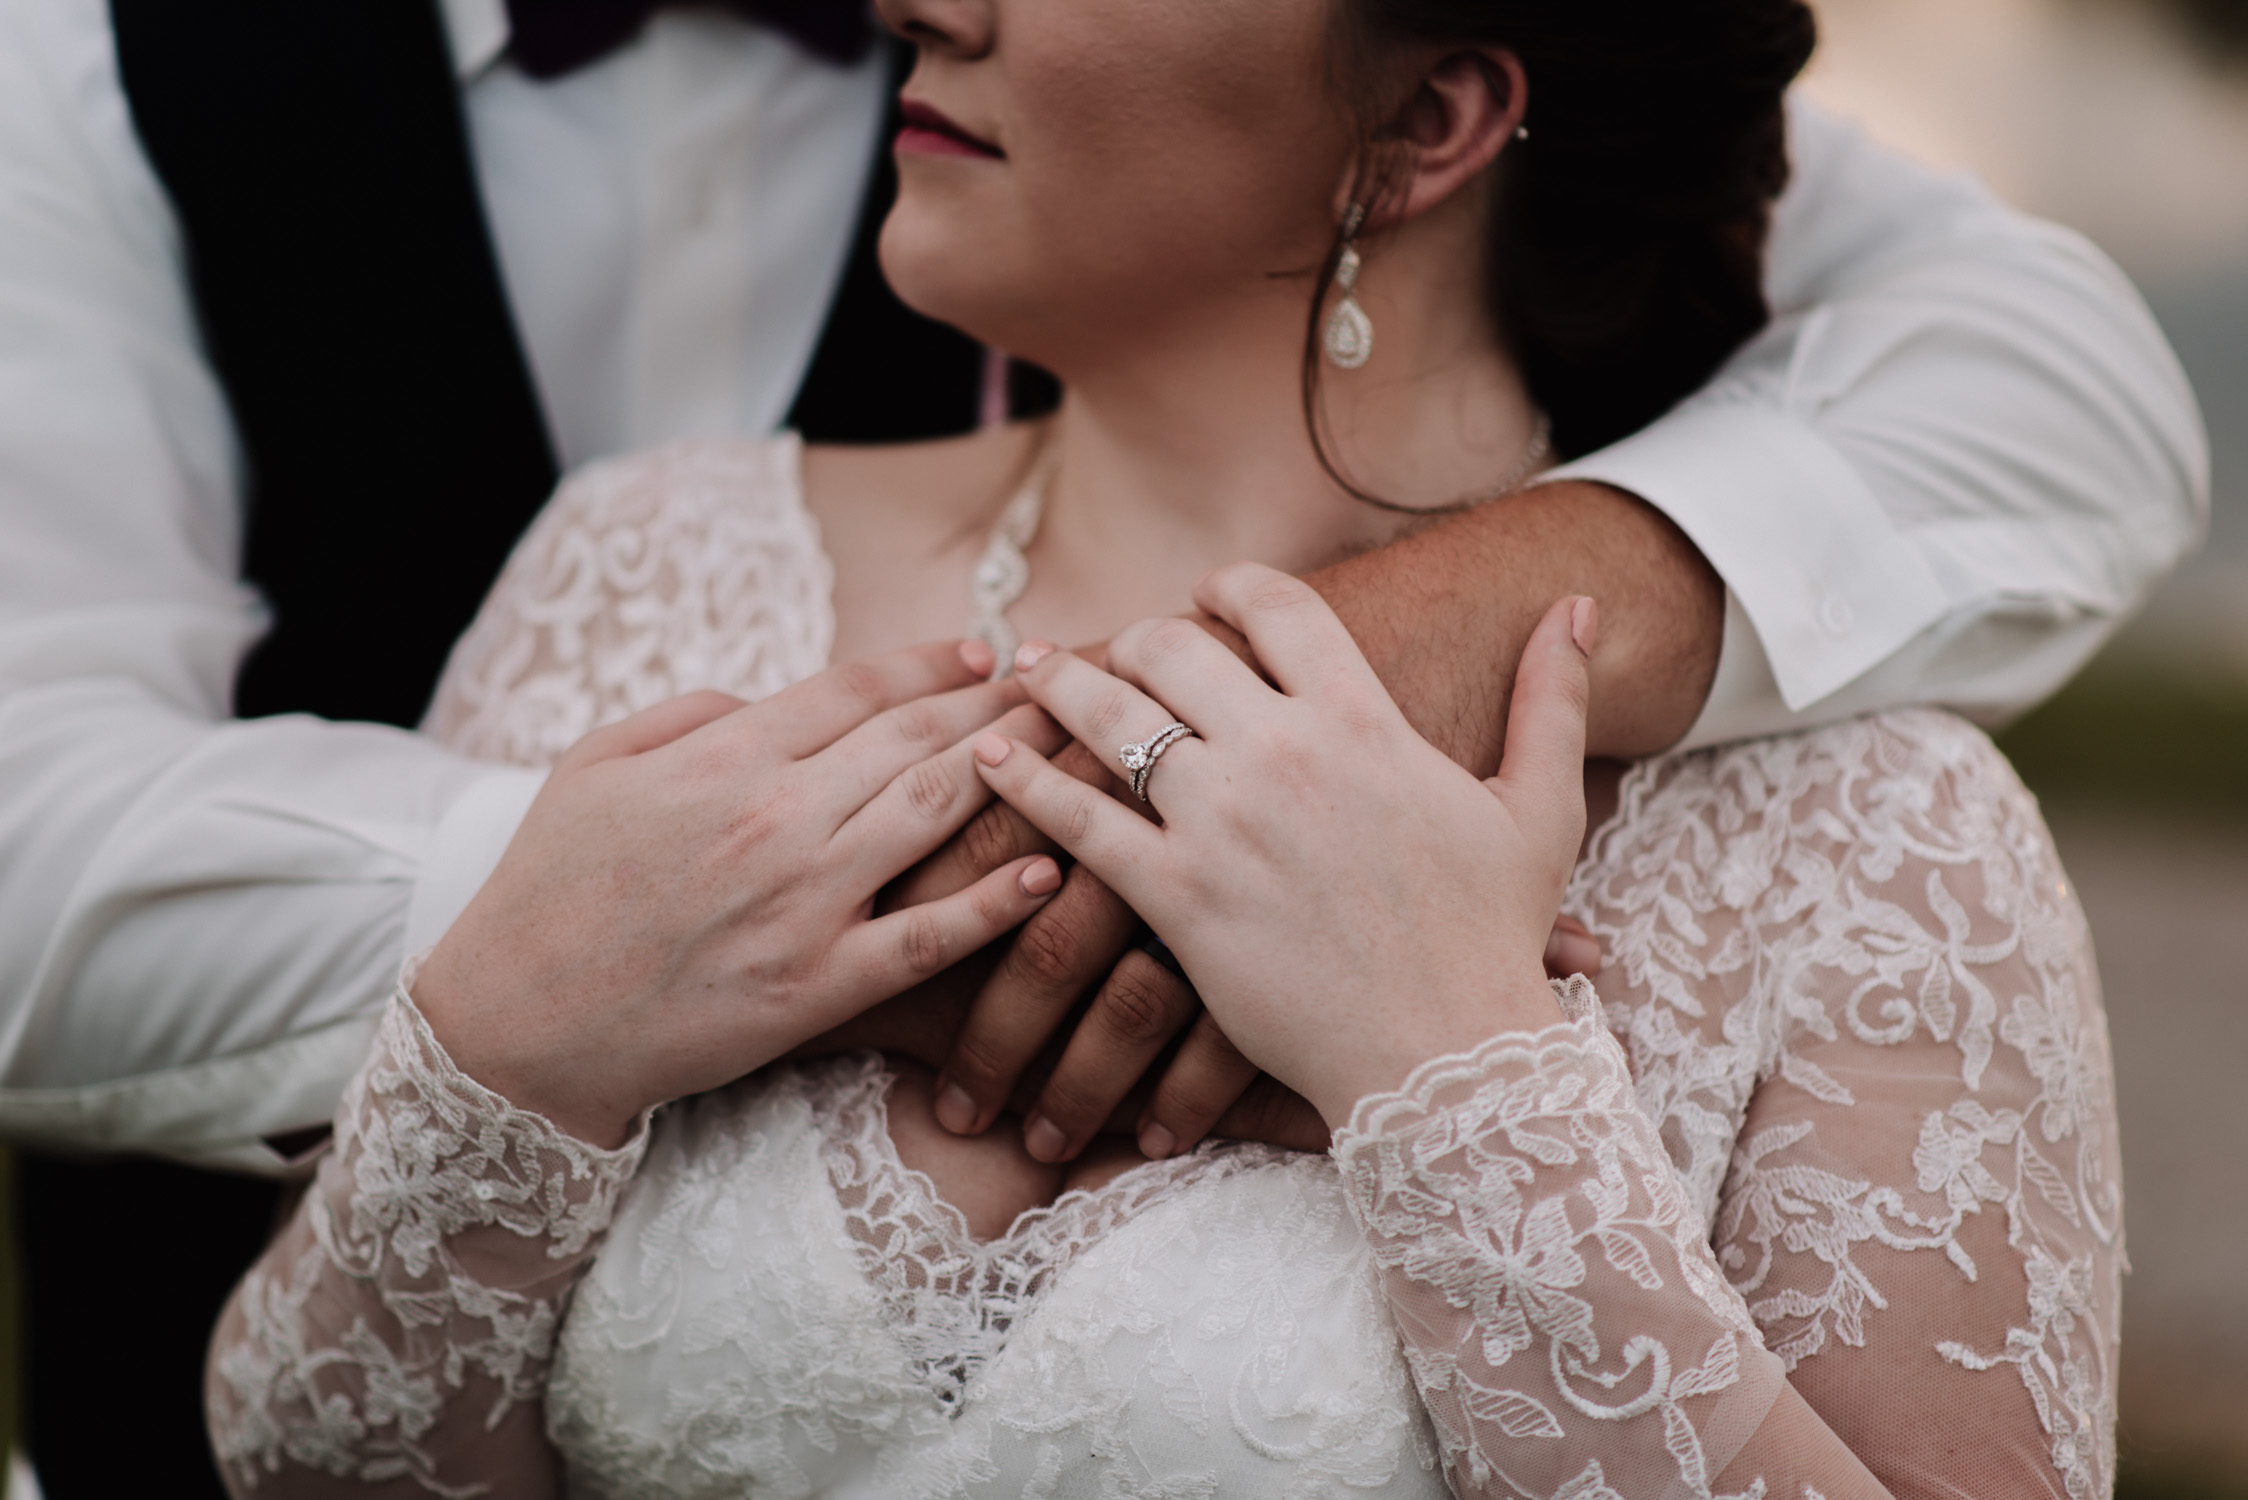 Classy, Southern, Country Wedding | Bridal and Groom portraits at Atkinson Farms in Danville, Virginia | Greensboro Winston-Salem, NC Wedding Photographer